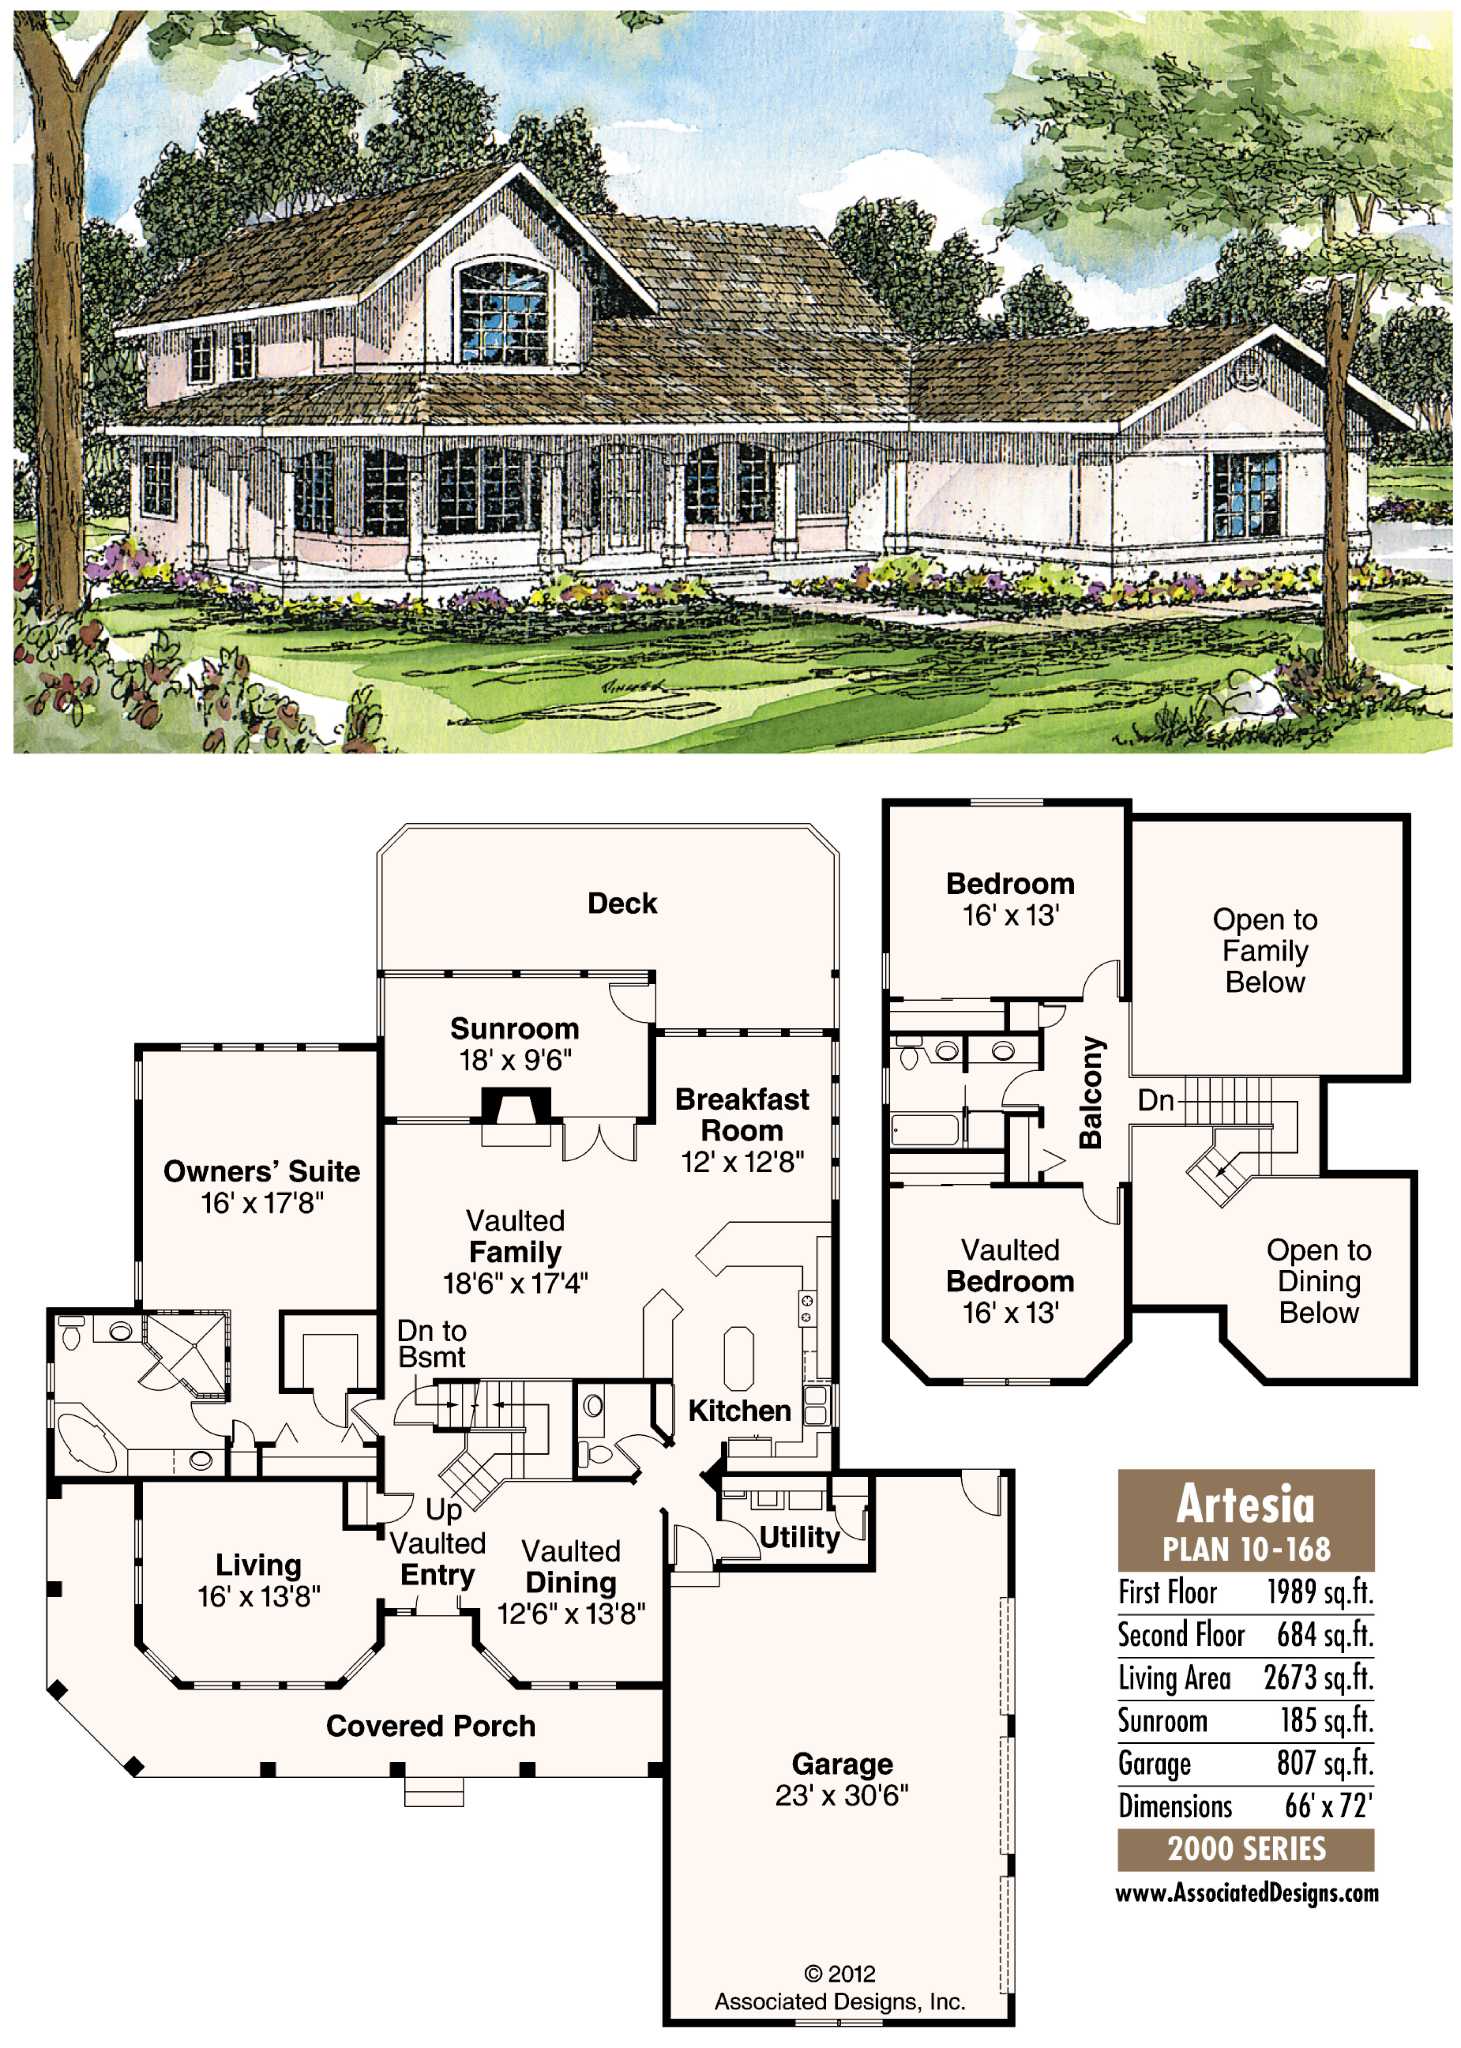 A simple house plan in NZ